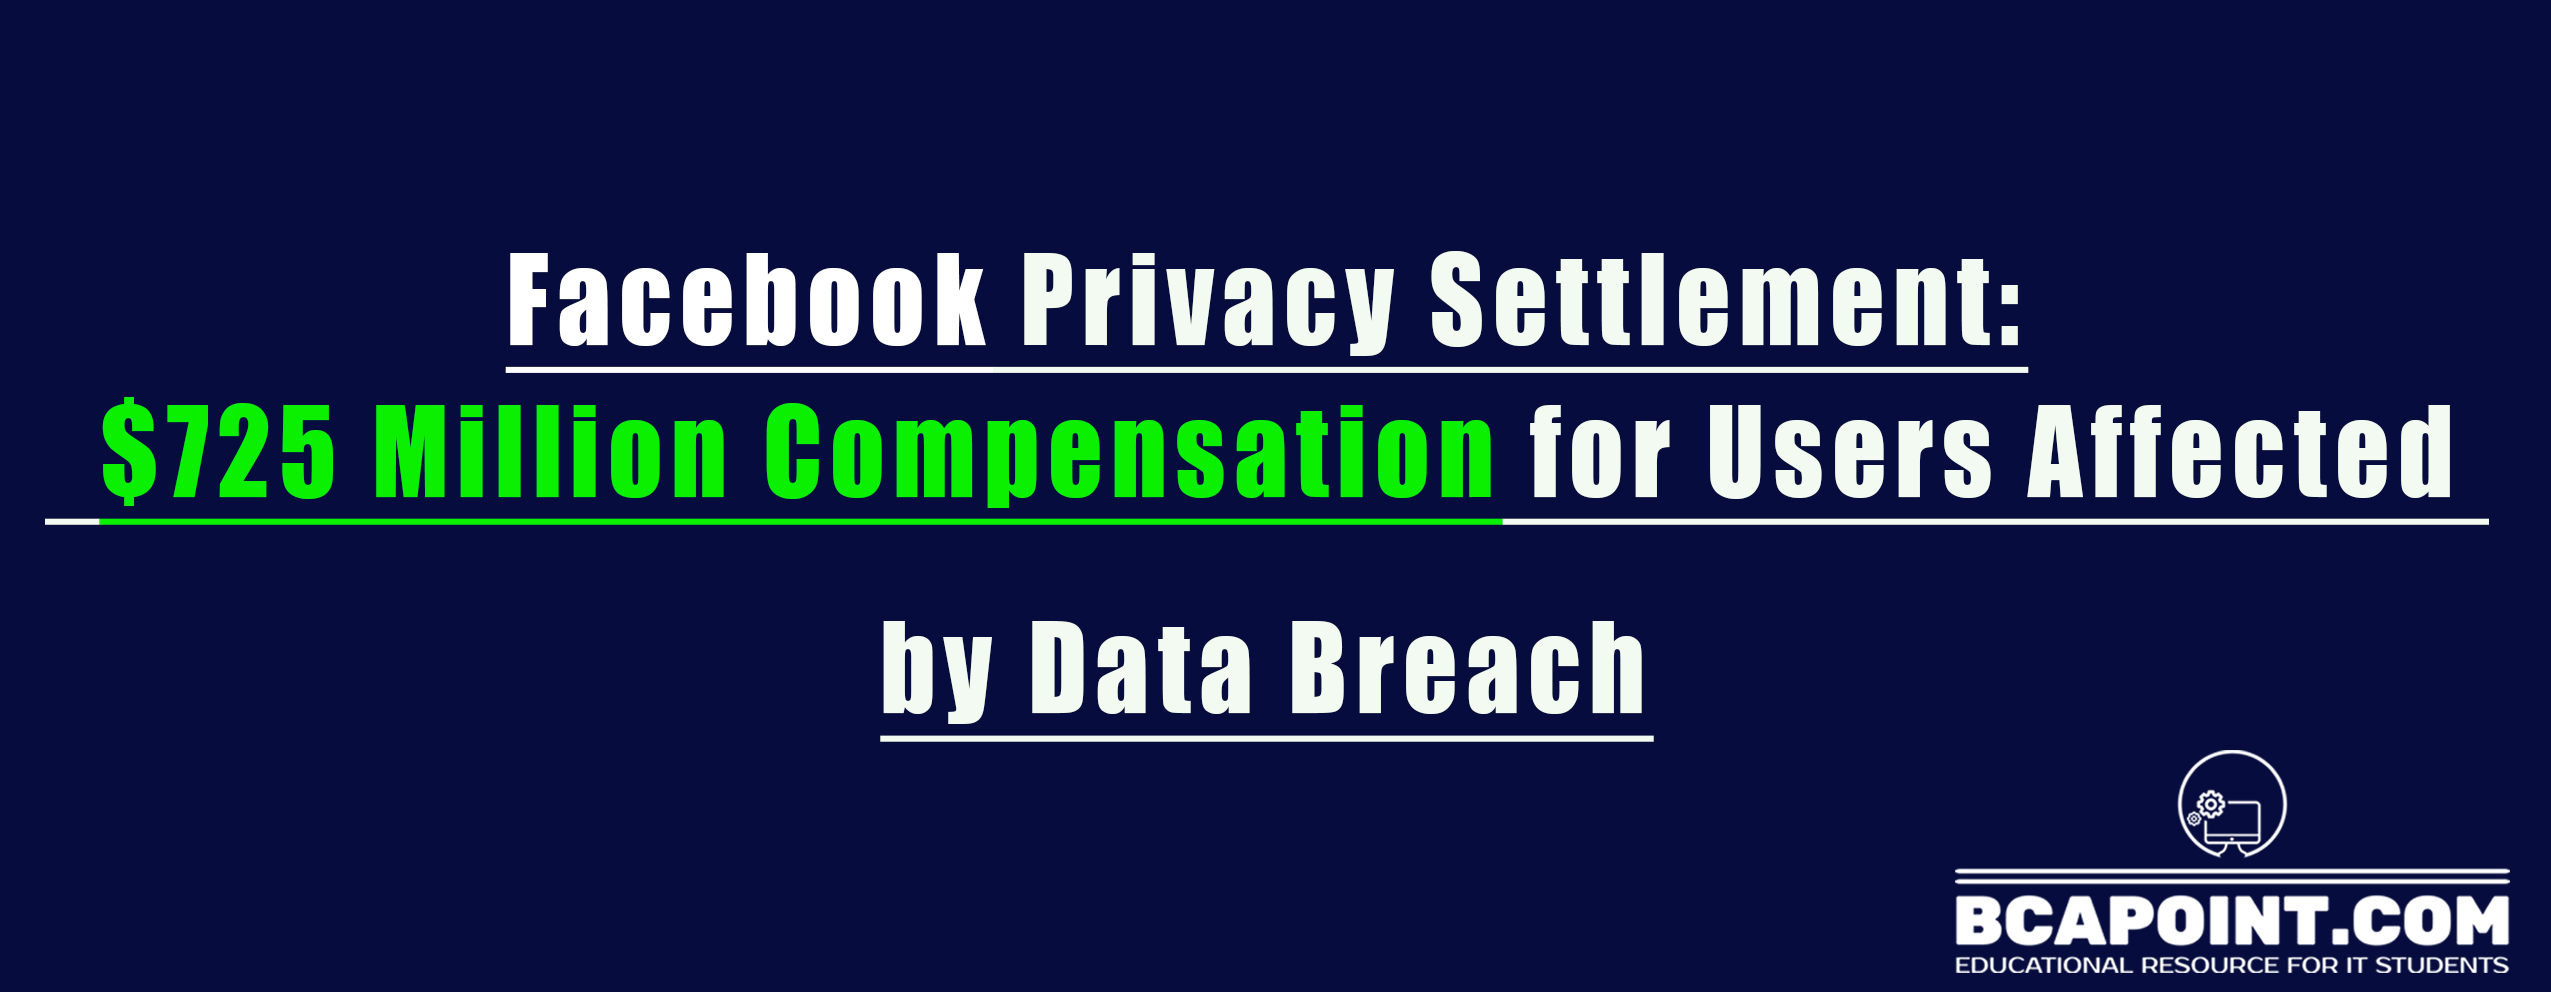 You are currently viewing Facebook Privacy Settlement:  $725 Million Compensation for Users Affected by Data Breach 